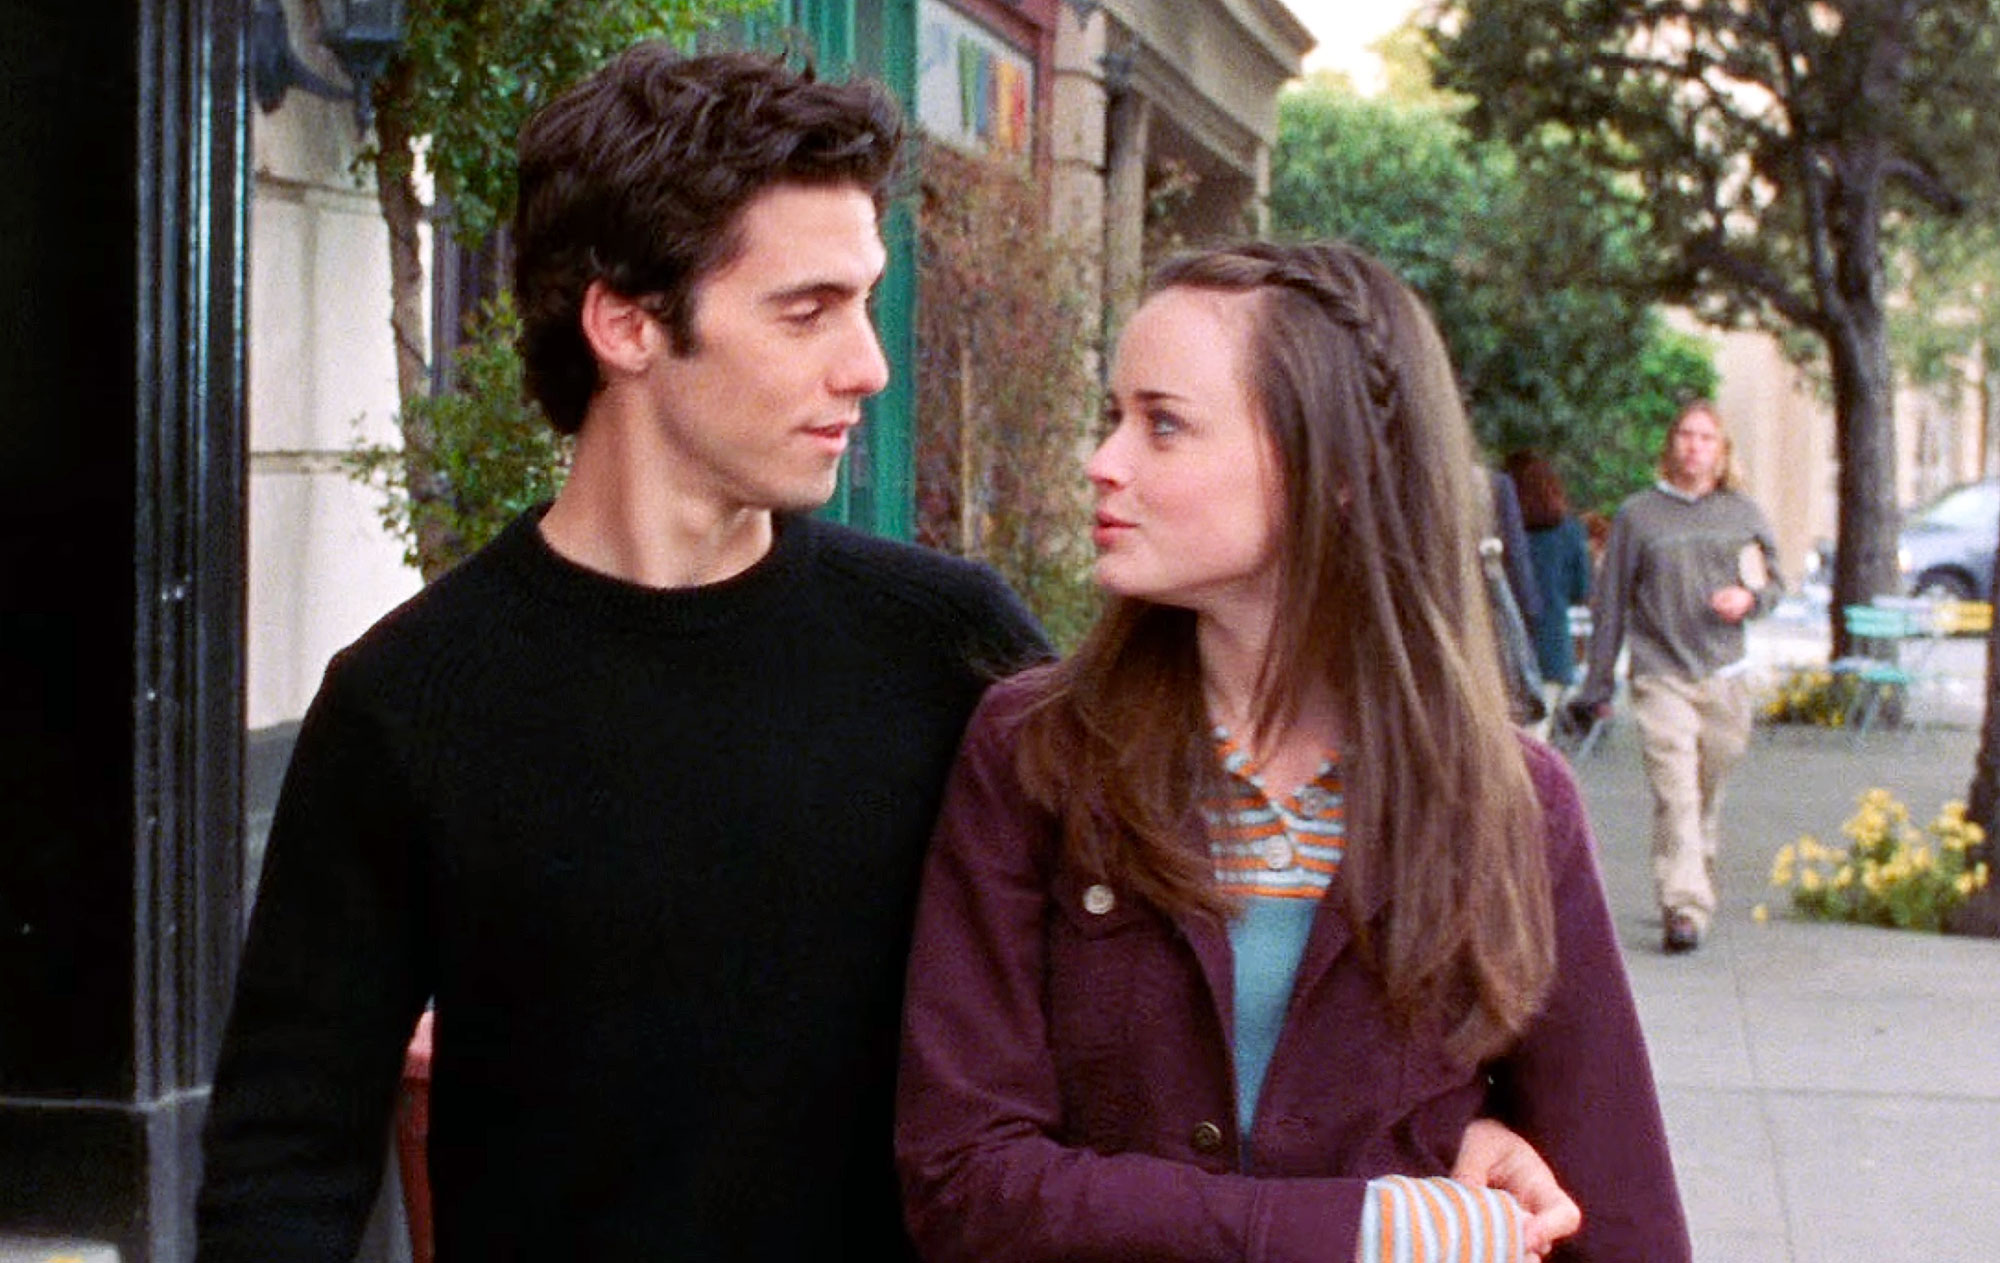 Has dated who alexis bledel 'Gilmore Girls':